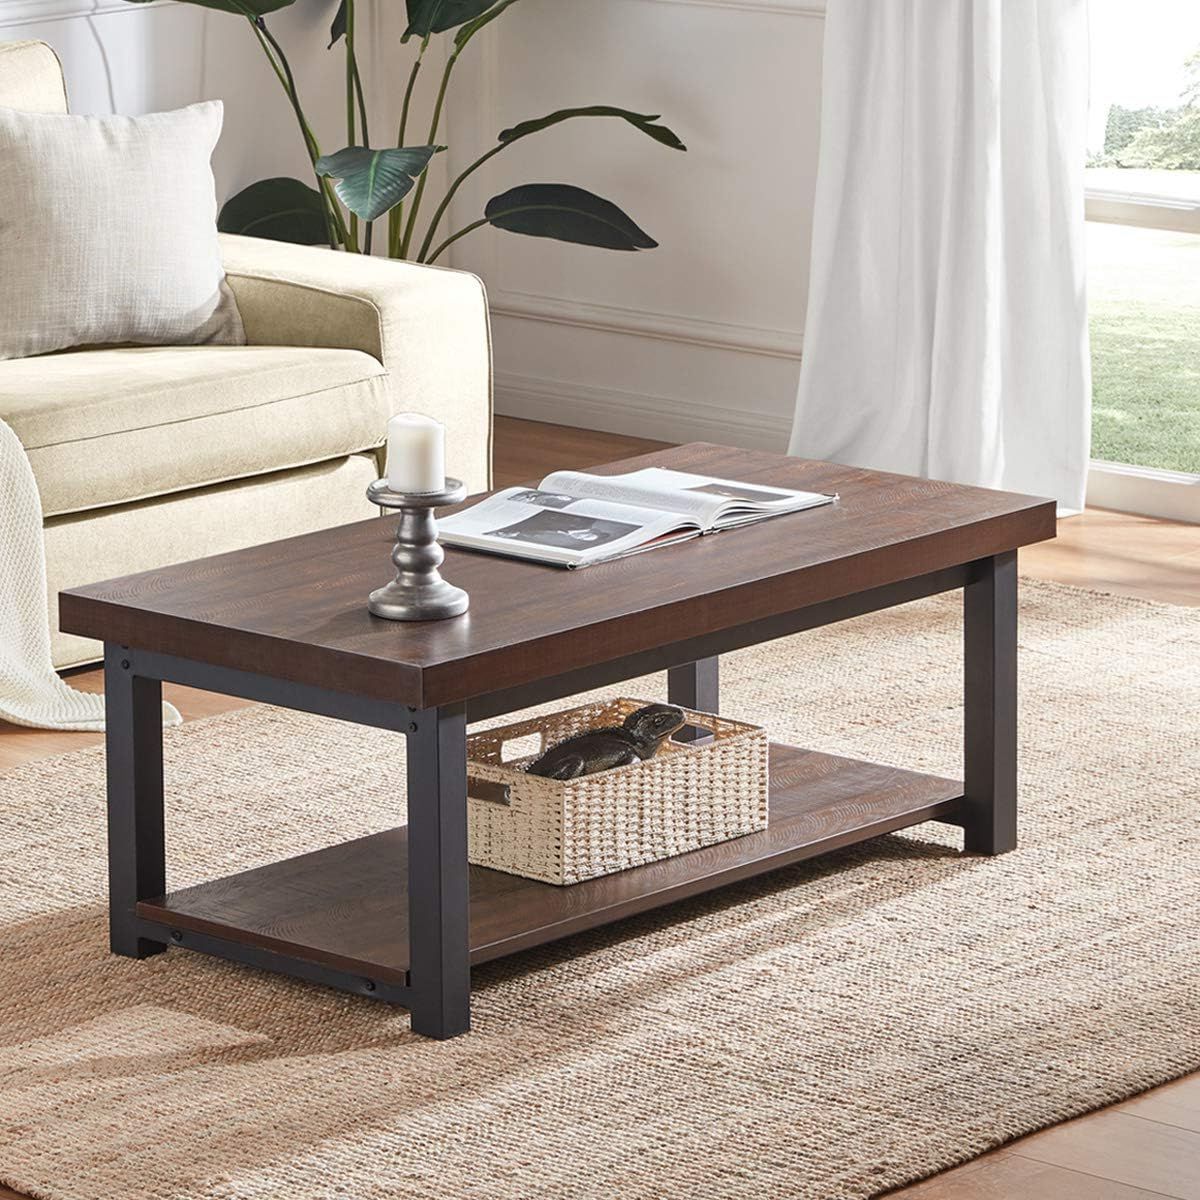 Most Popular Espresso Wood Finish Coffee Tables Within Espresso Coffee Table (View 10 of 15)